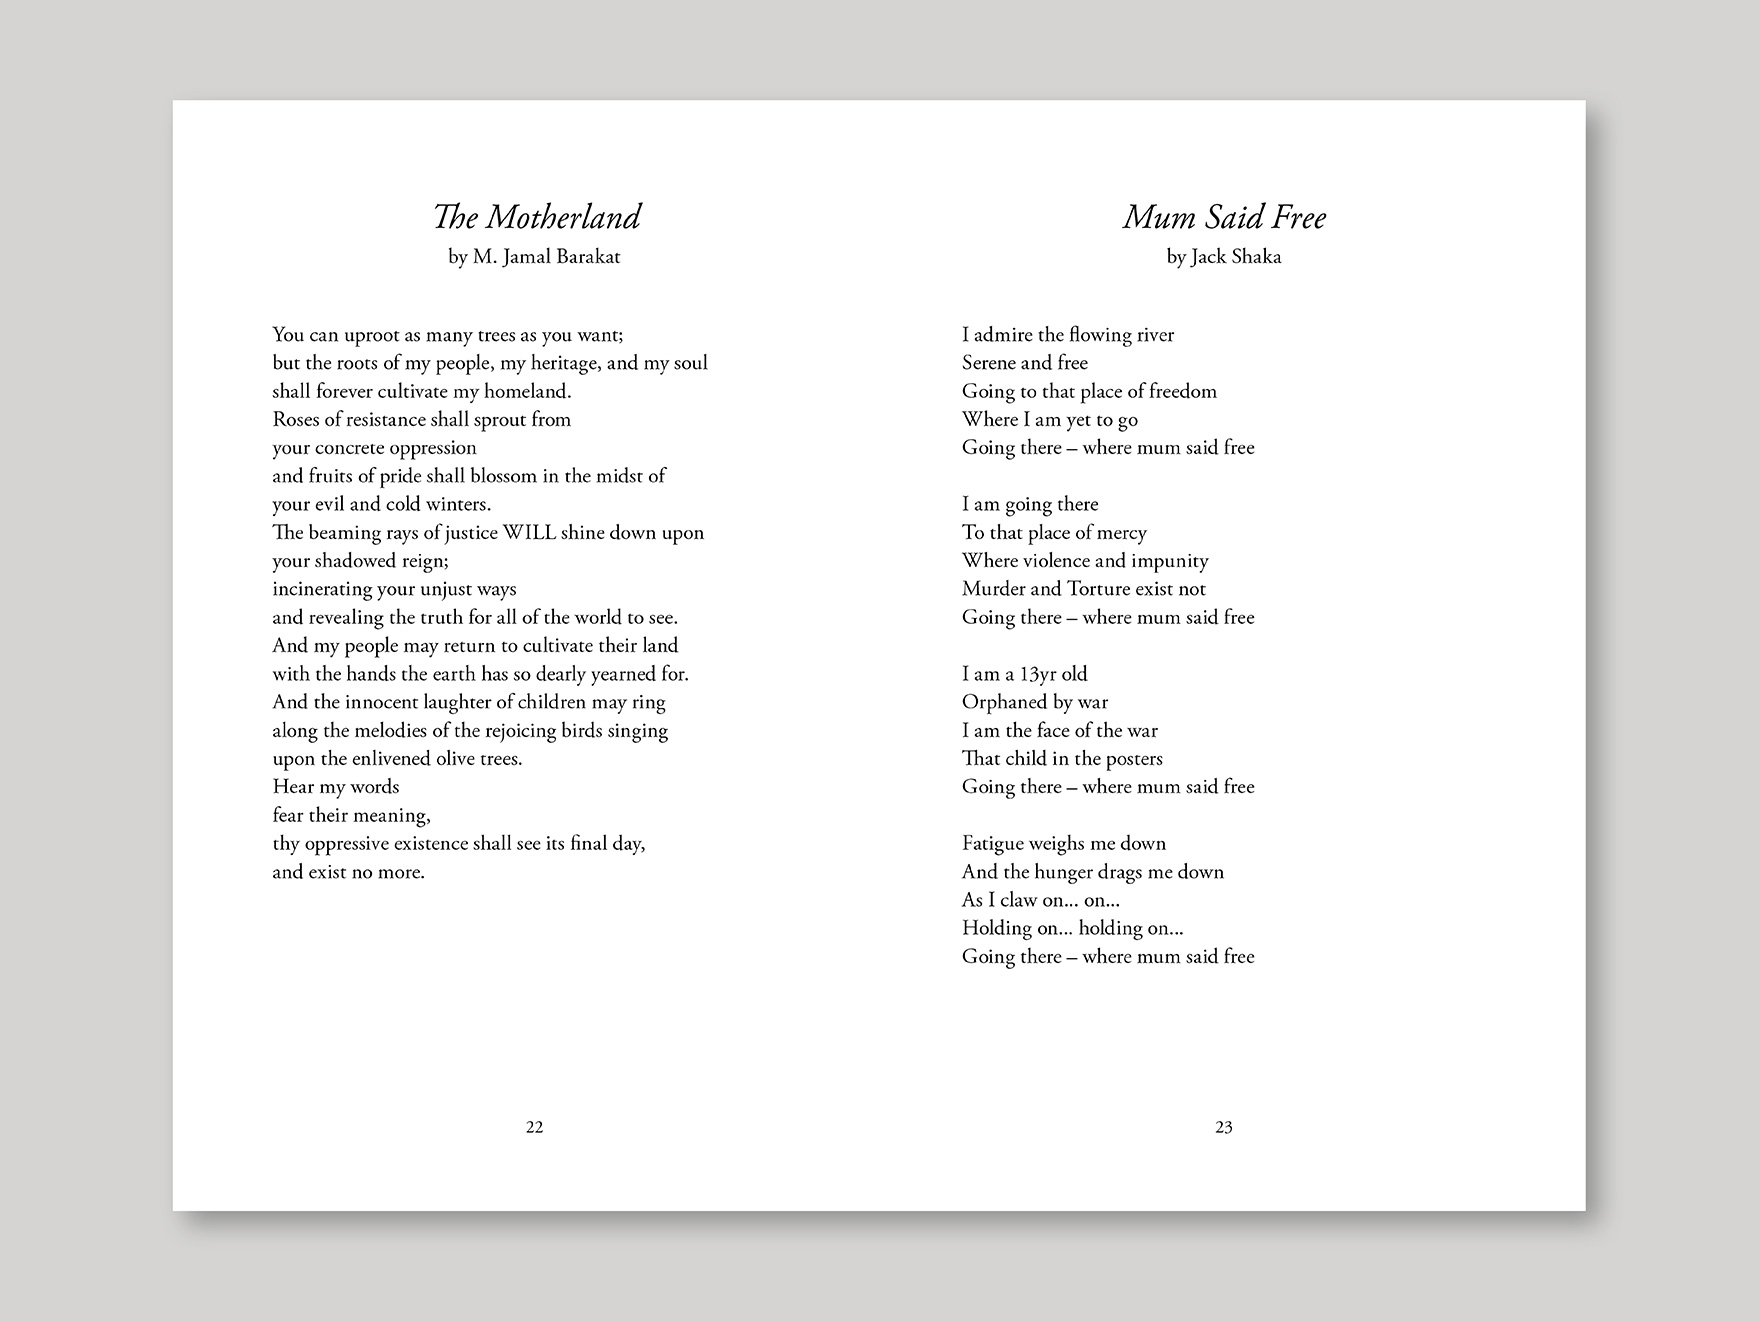 Inside typeset pages from a poetry book